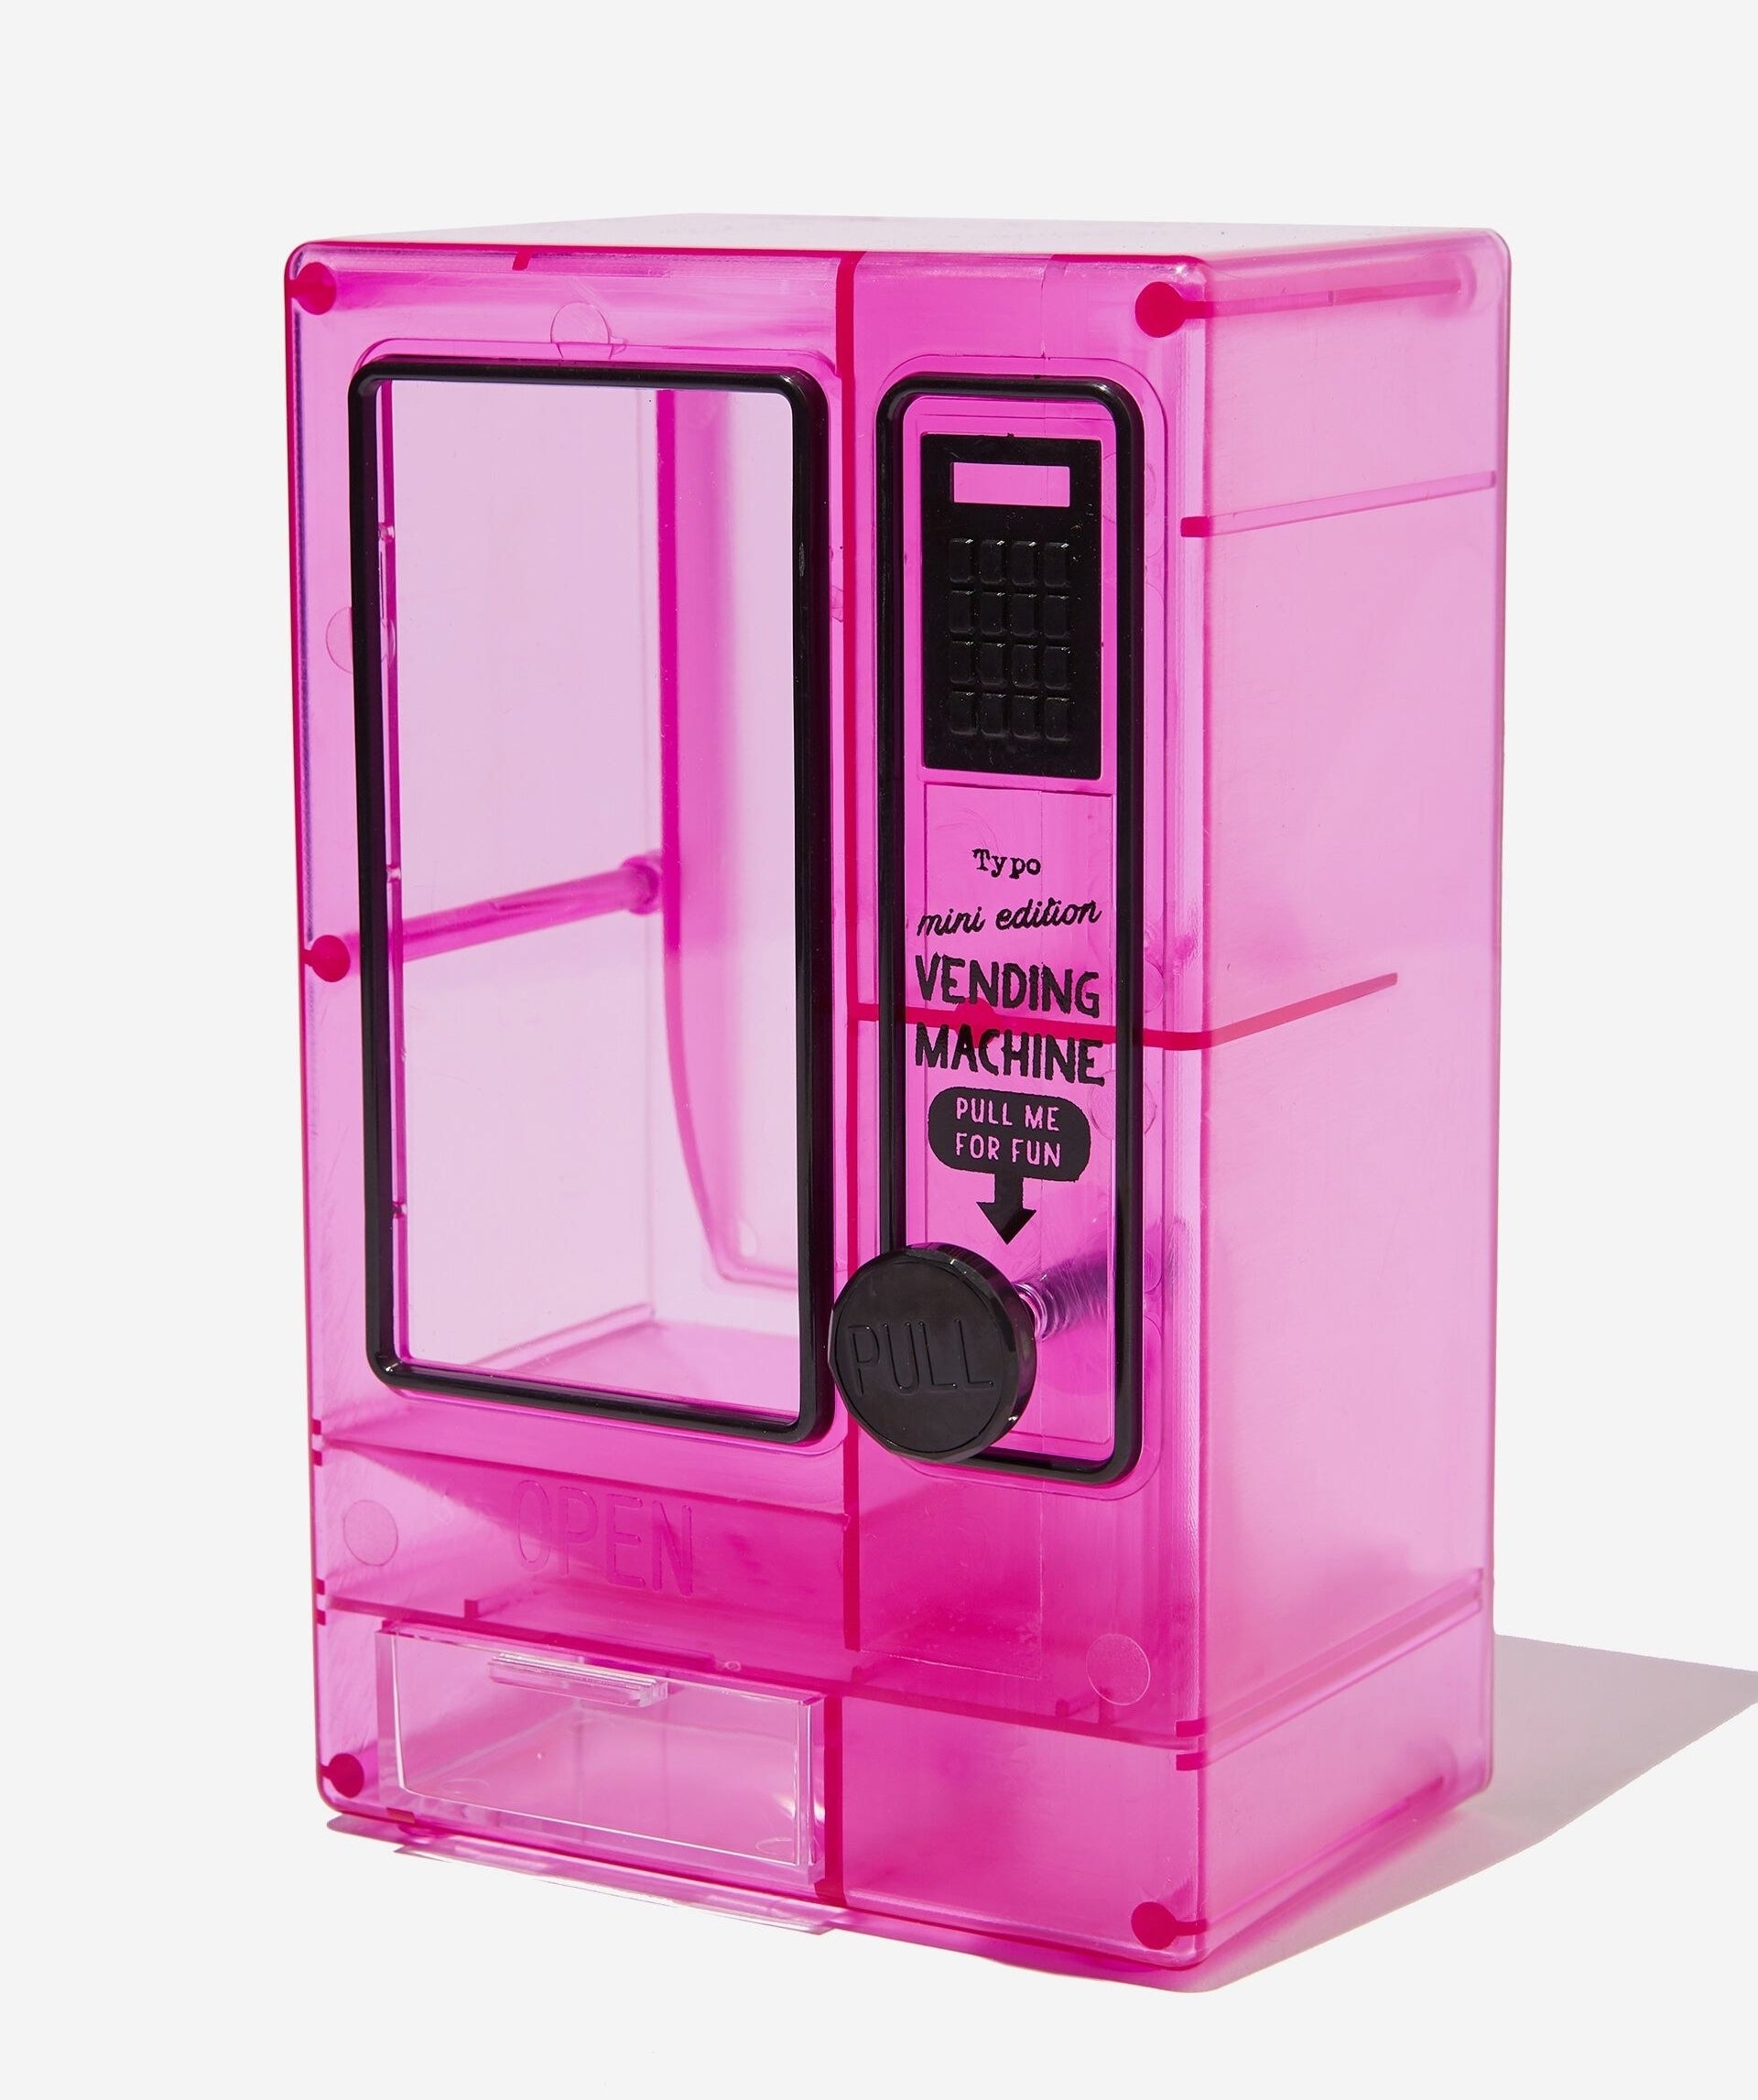 translucent pink vending machine with pull lever